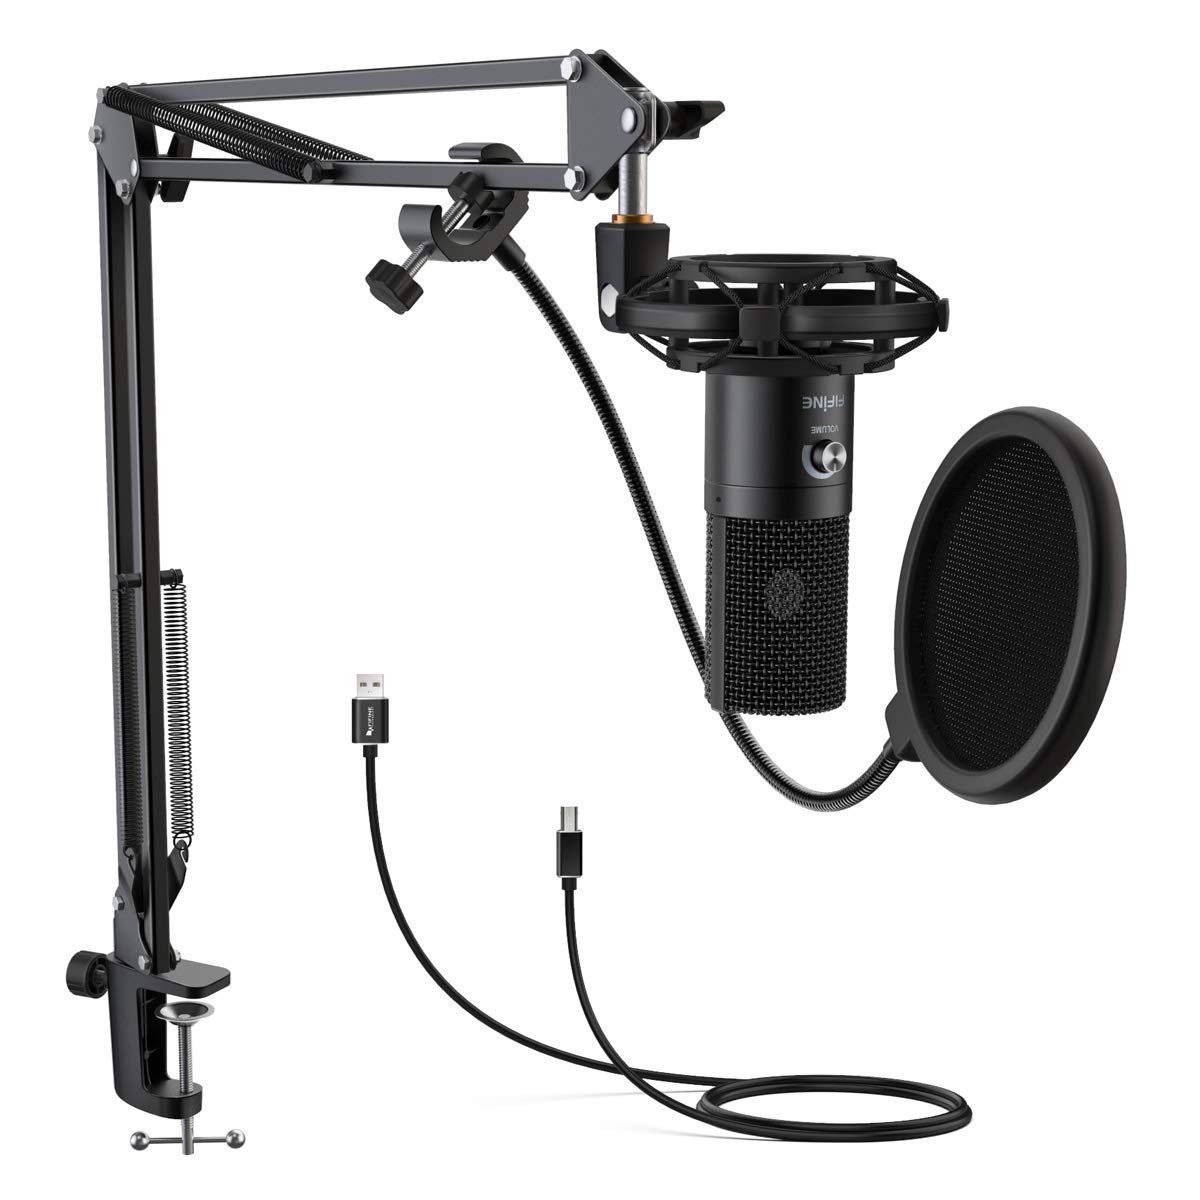 FIFINE USB Gaming Microphone Set with Flexible Arm Stand Pop